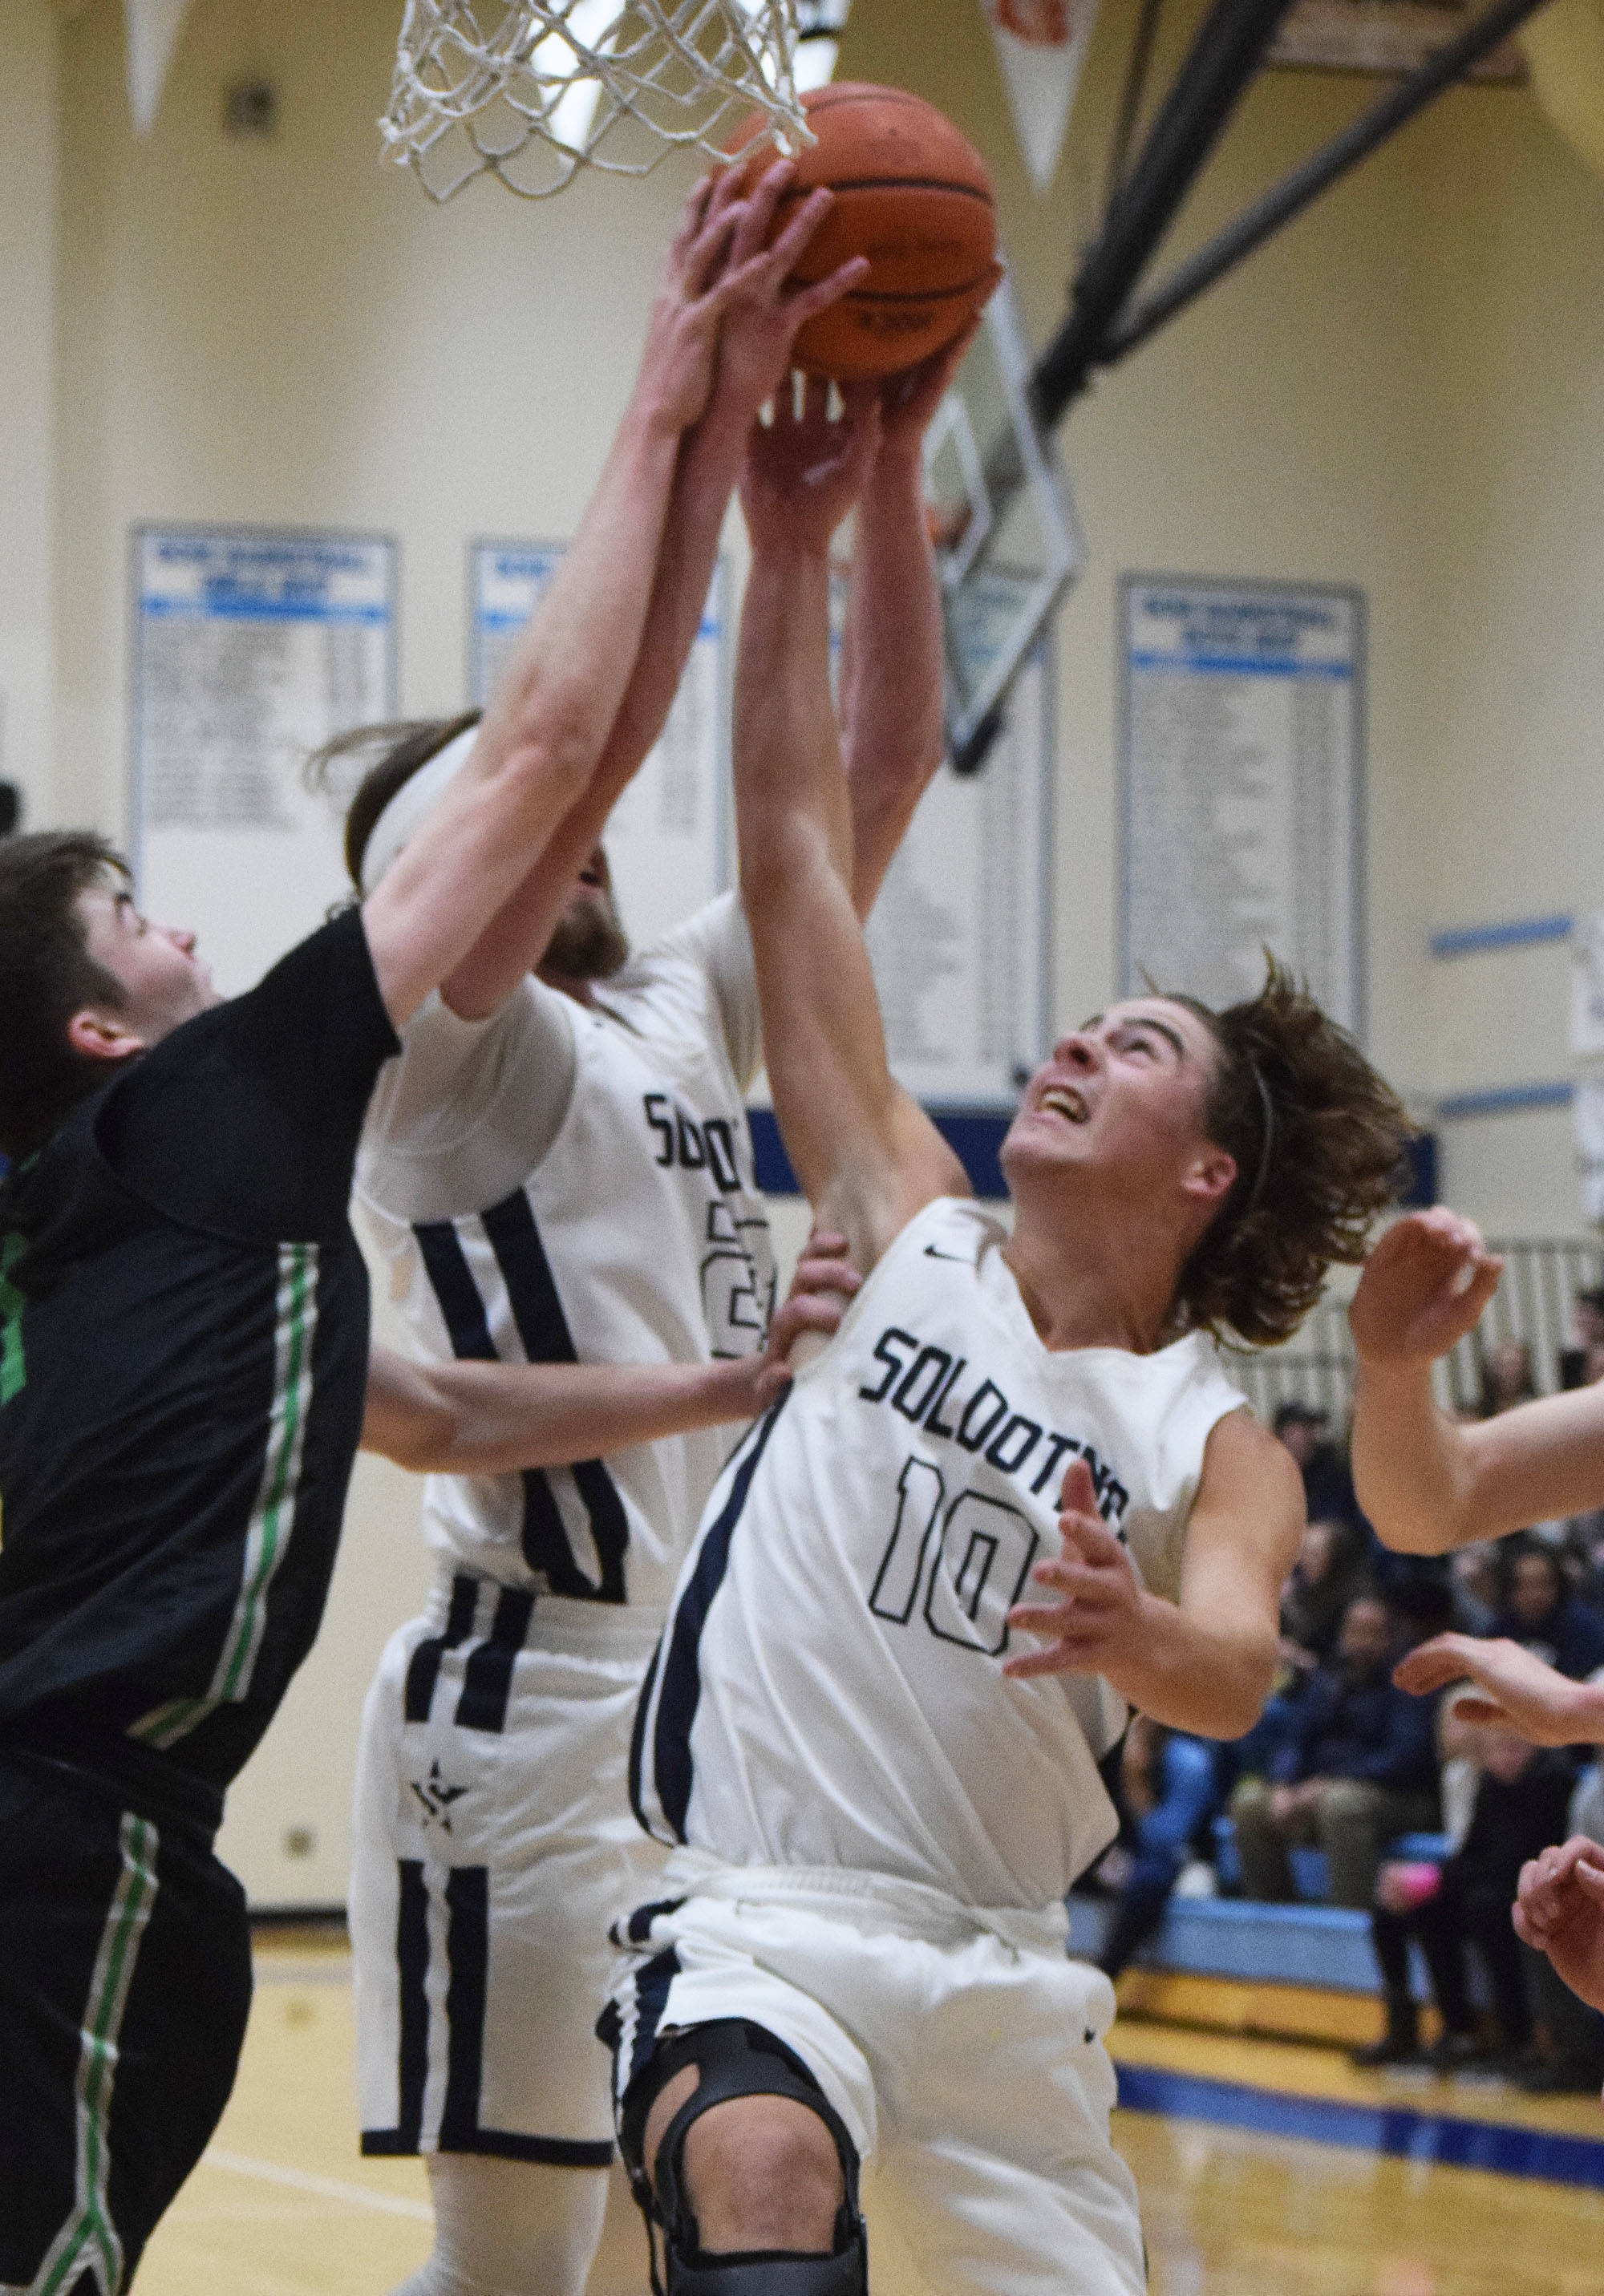 Soldotna’s Zach Hanson (10) competes for a rebound Friday night against Colony at Soldotna High School. (Photo by Joey Klecka/Peninsula Clarion)